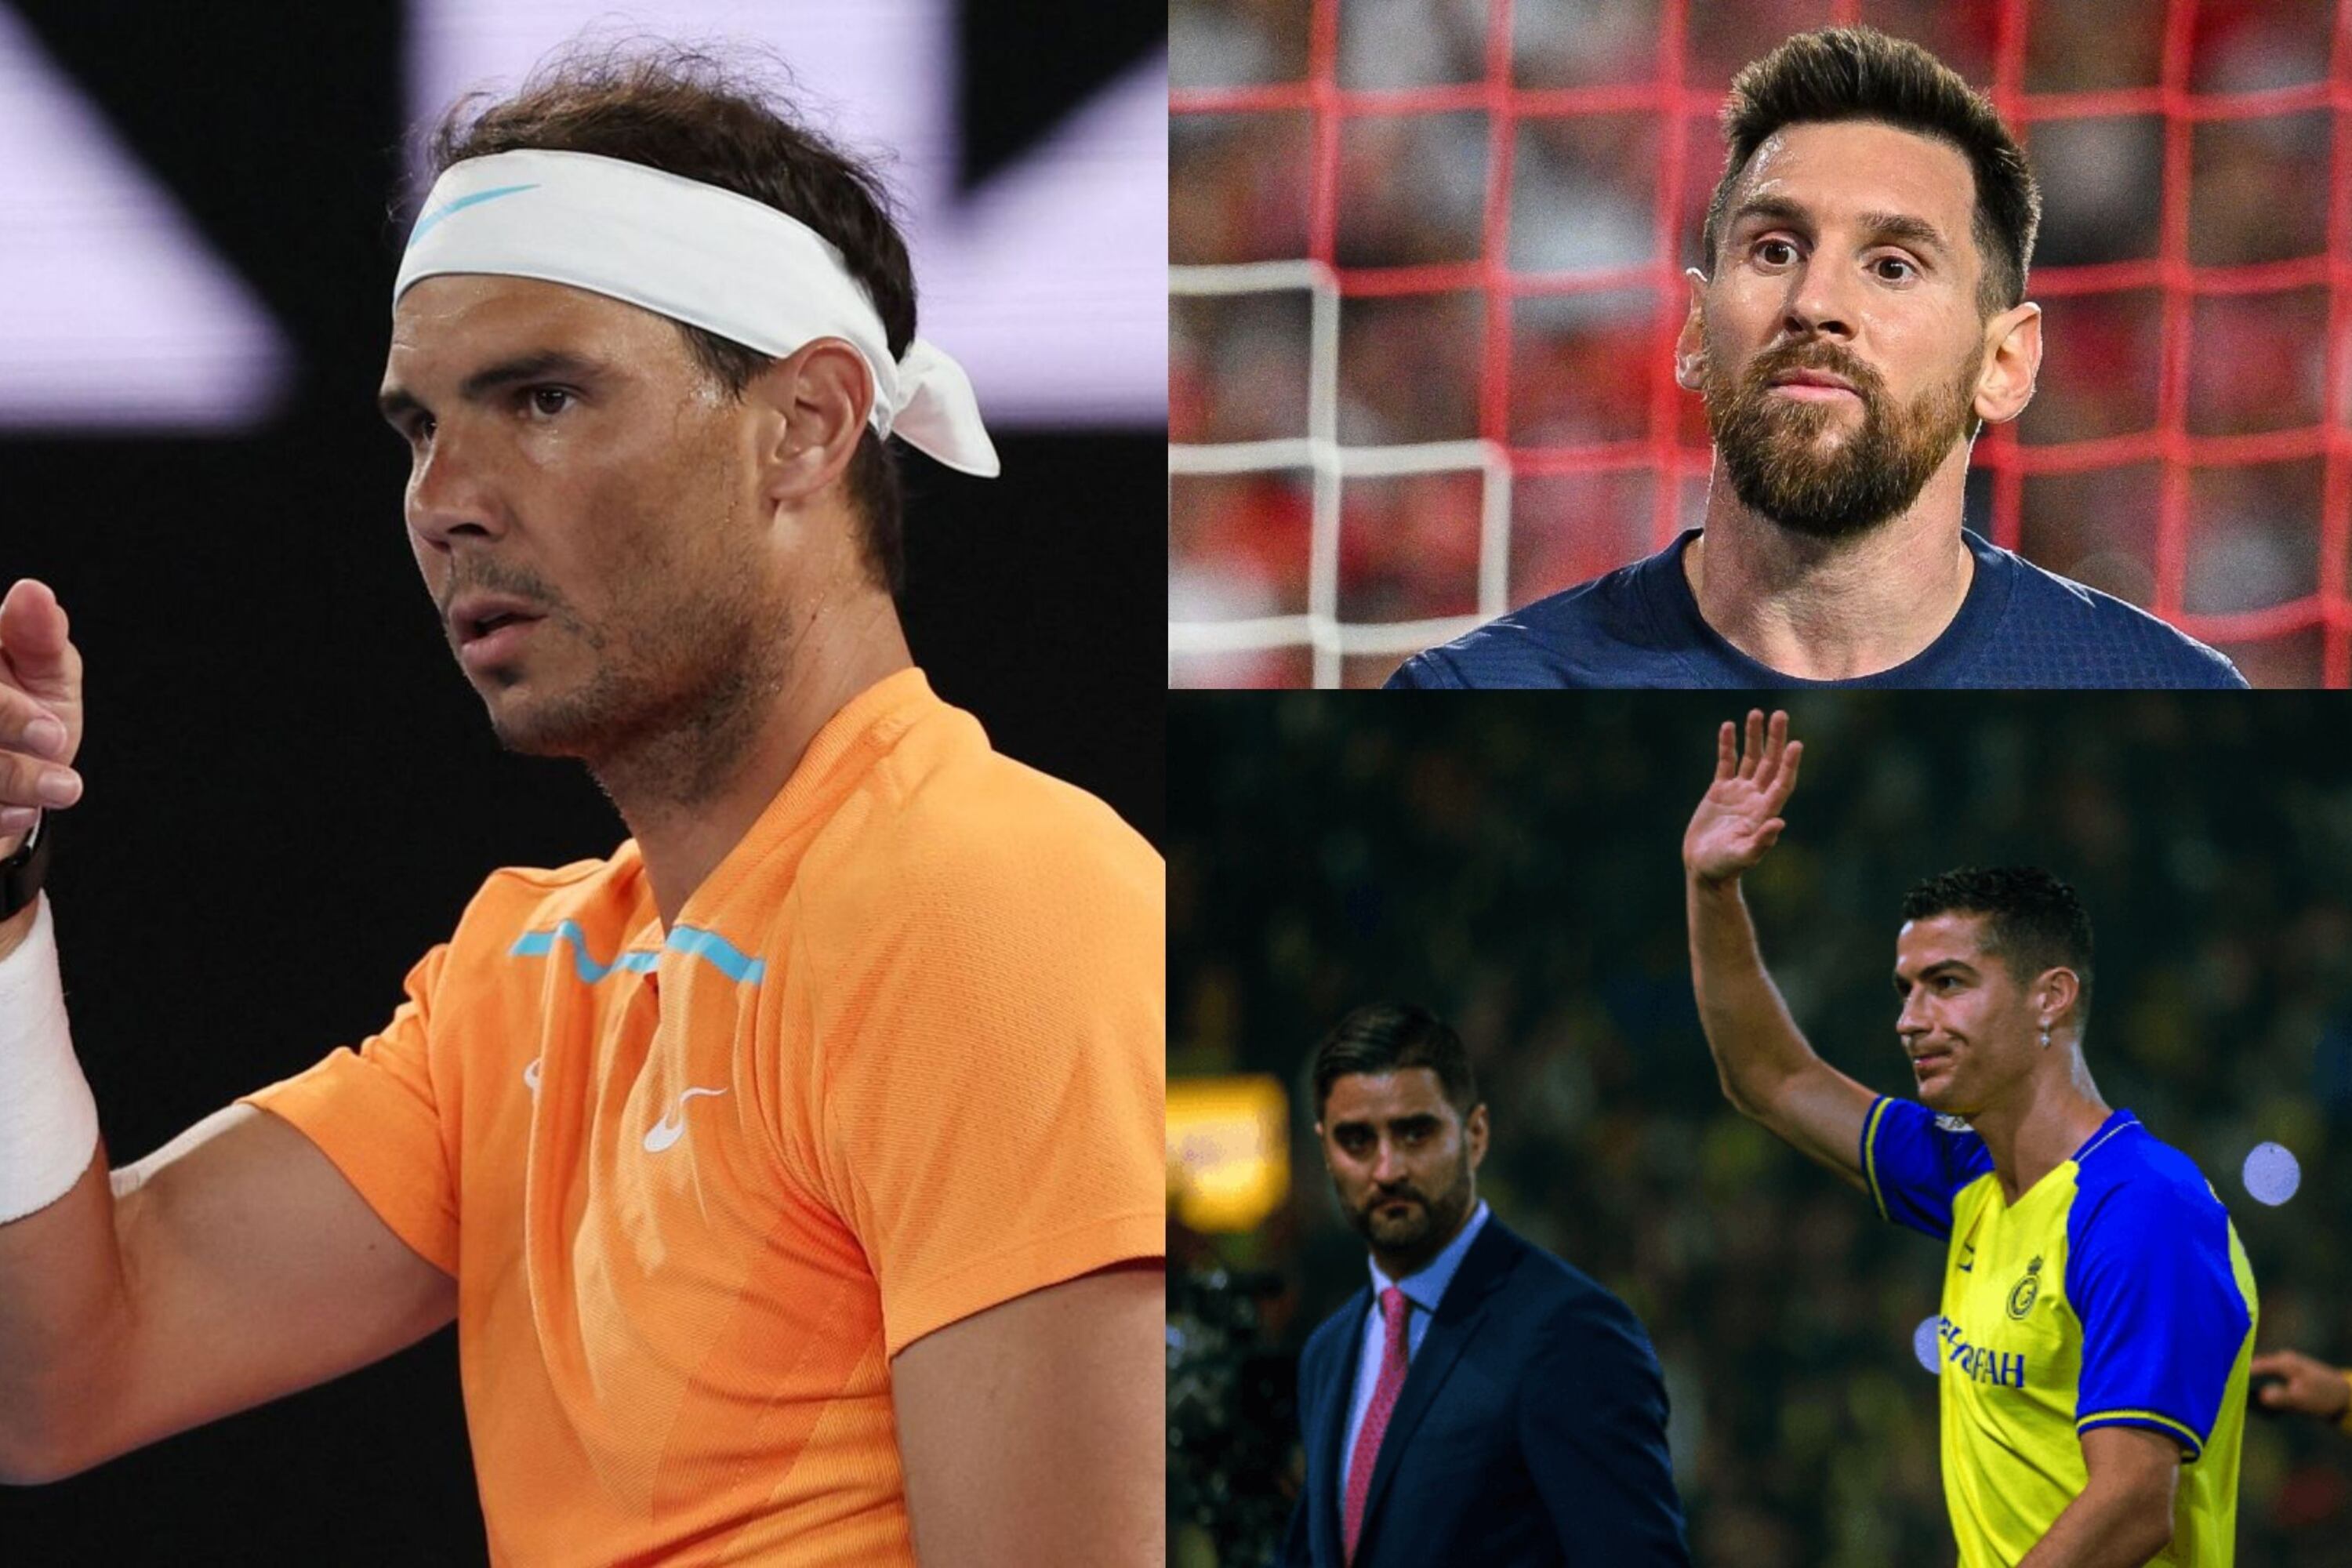 While Rafael Nadal toured the world and earned 10 million, the difference generated by Messi vs Cristiano